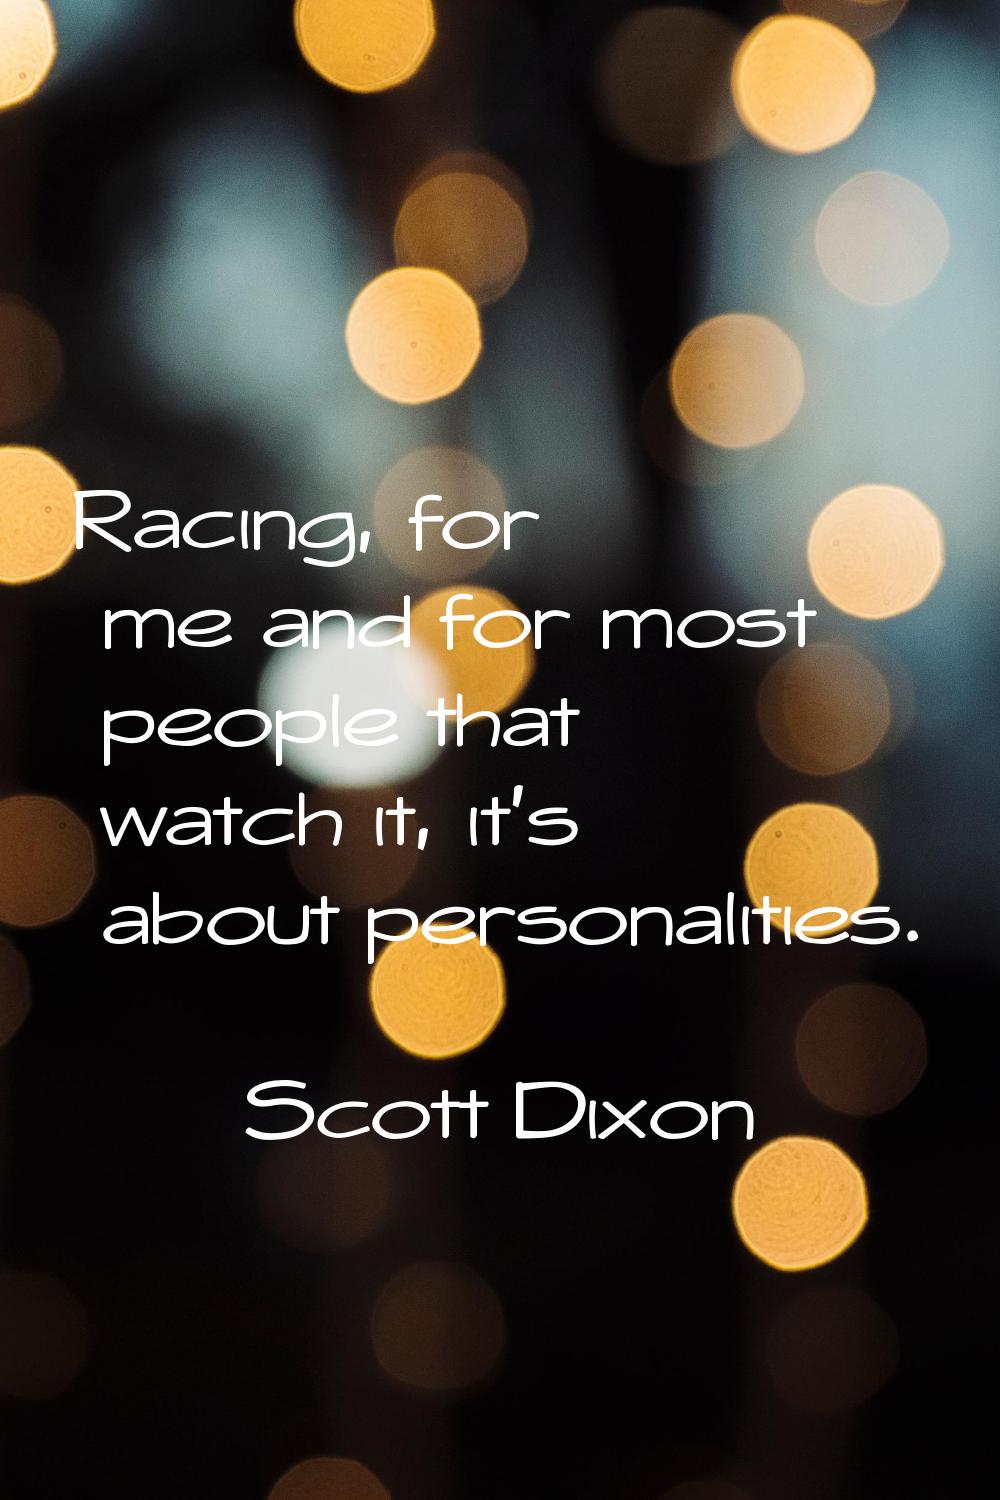 Racing, for me and for most people that watch it, it's about personalities.